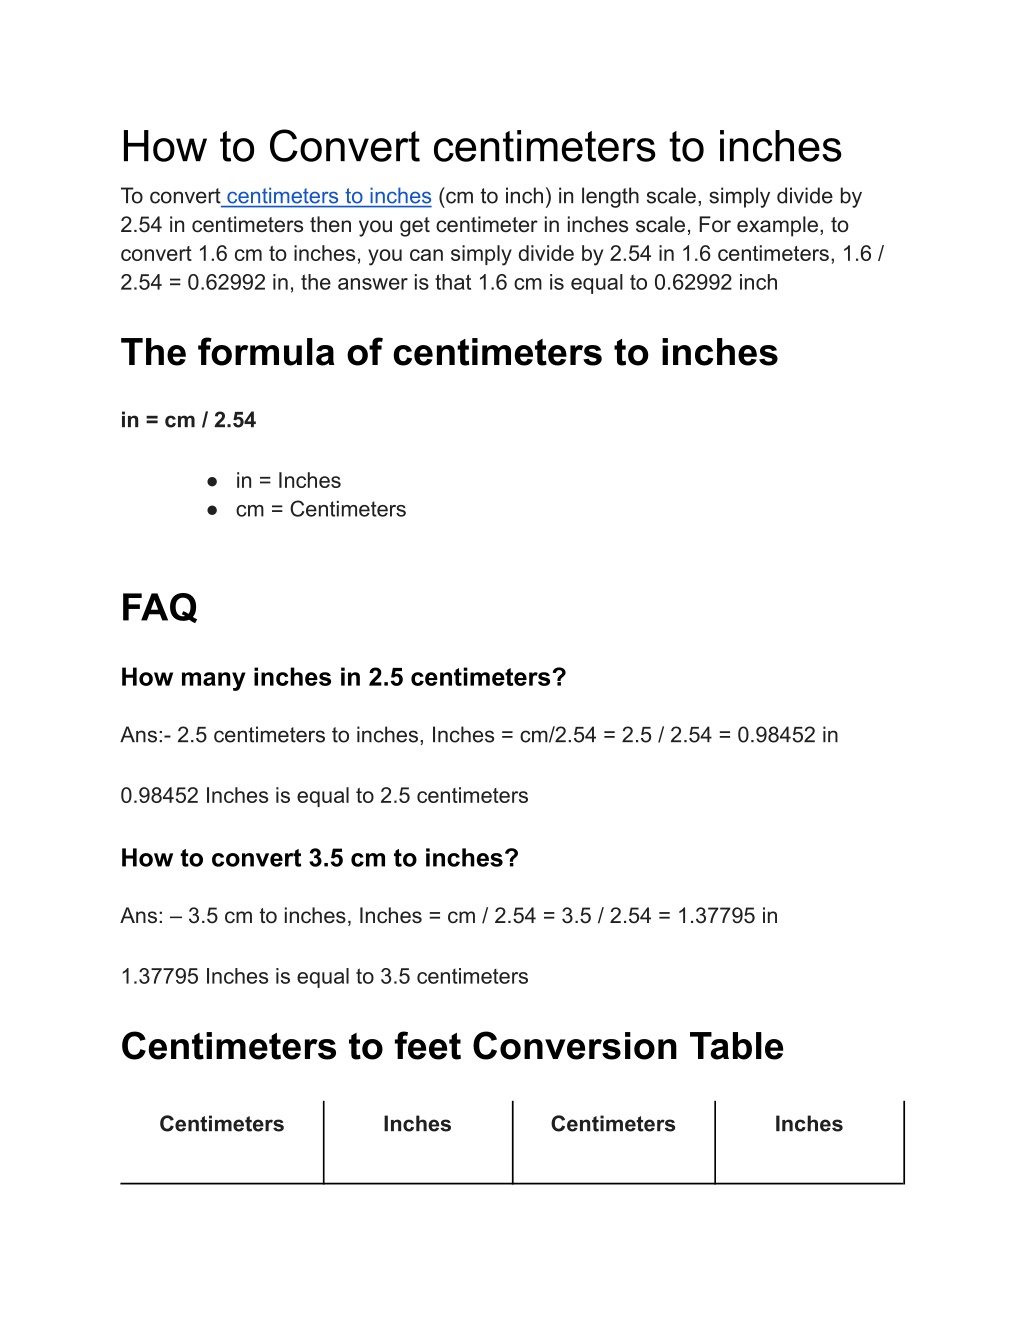 Ppt How To Convert Centimeters To Inches Powerpoint Presentation Free Download Id11764271 6709